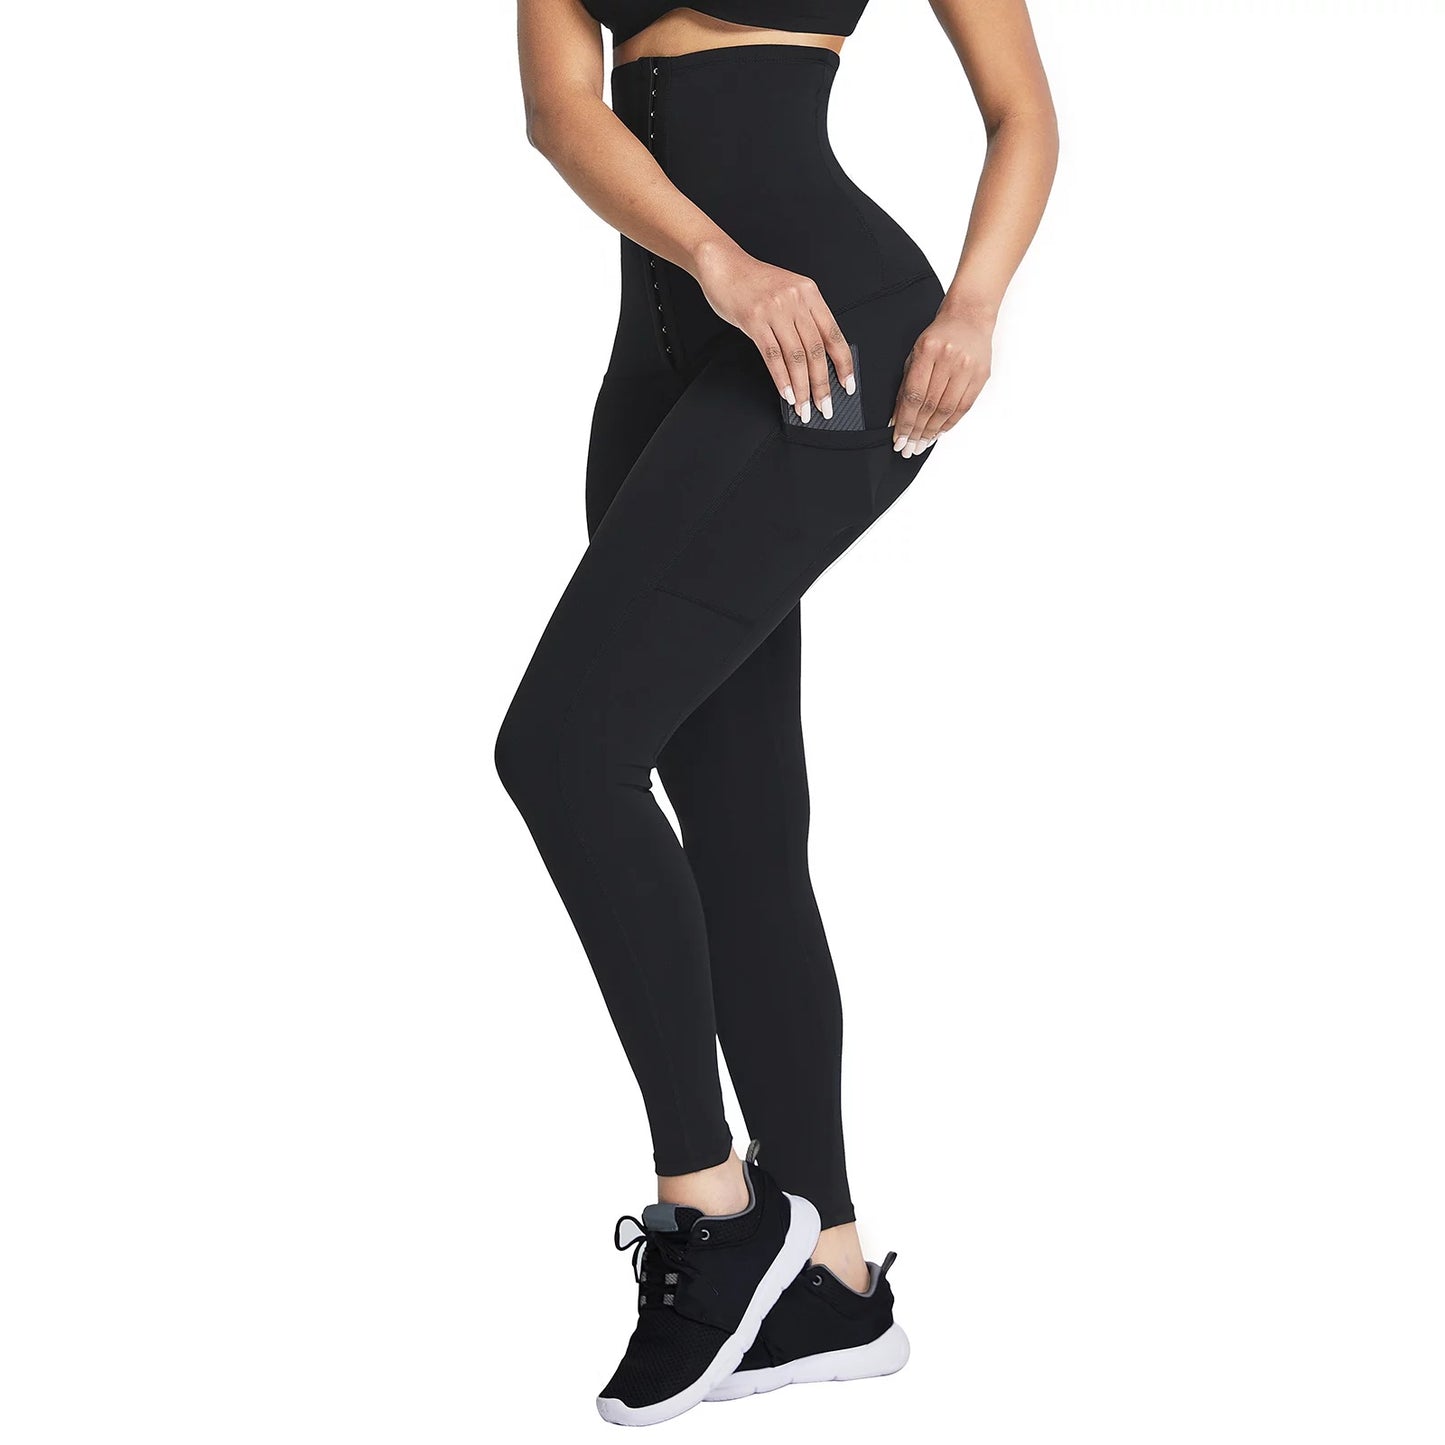 High Waisted Compressing Leggings